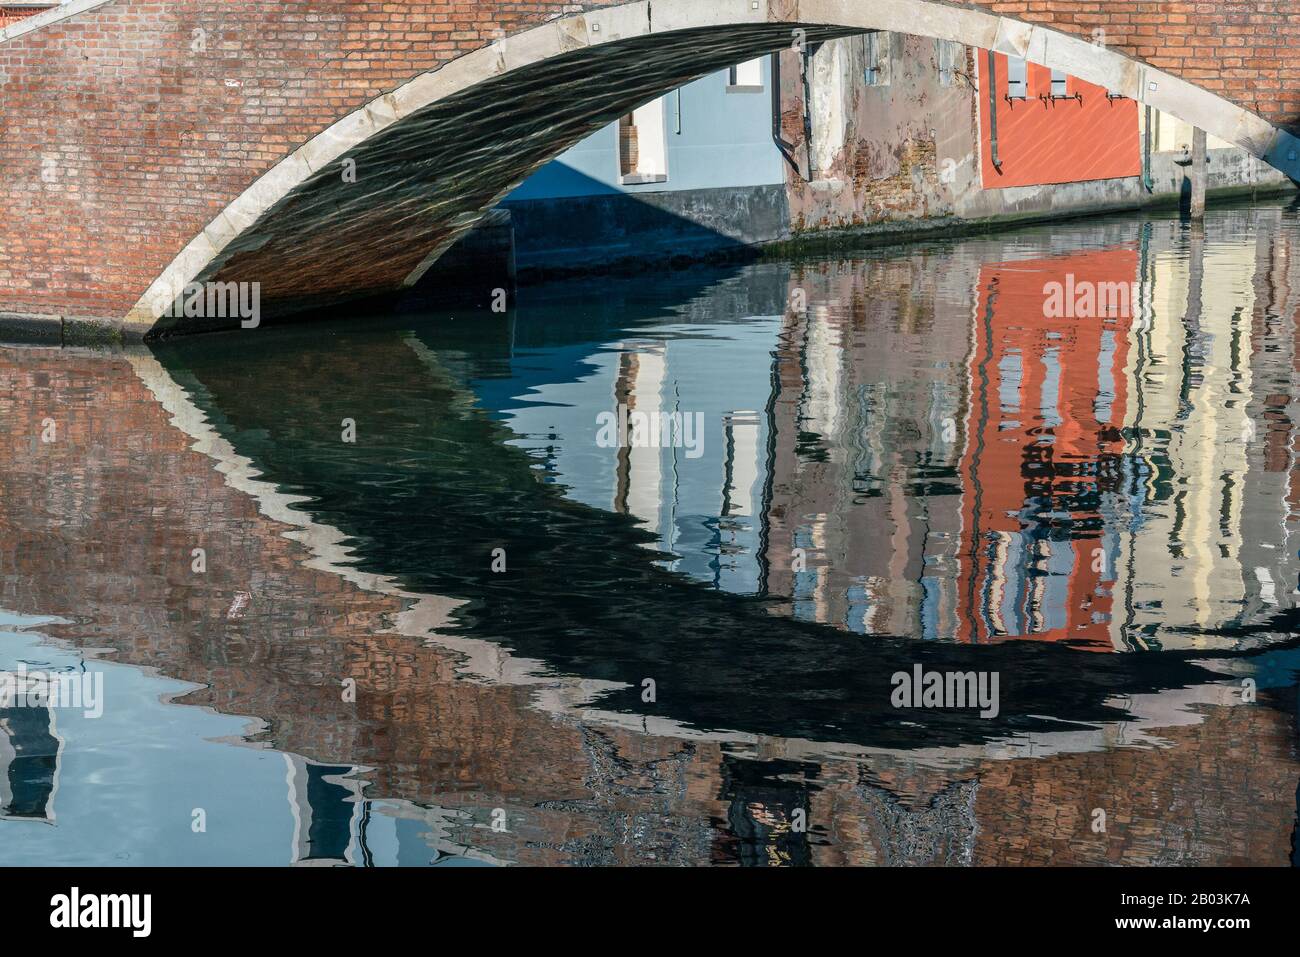 Images of Venice Stock Photo